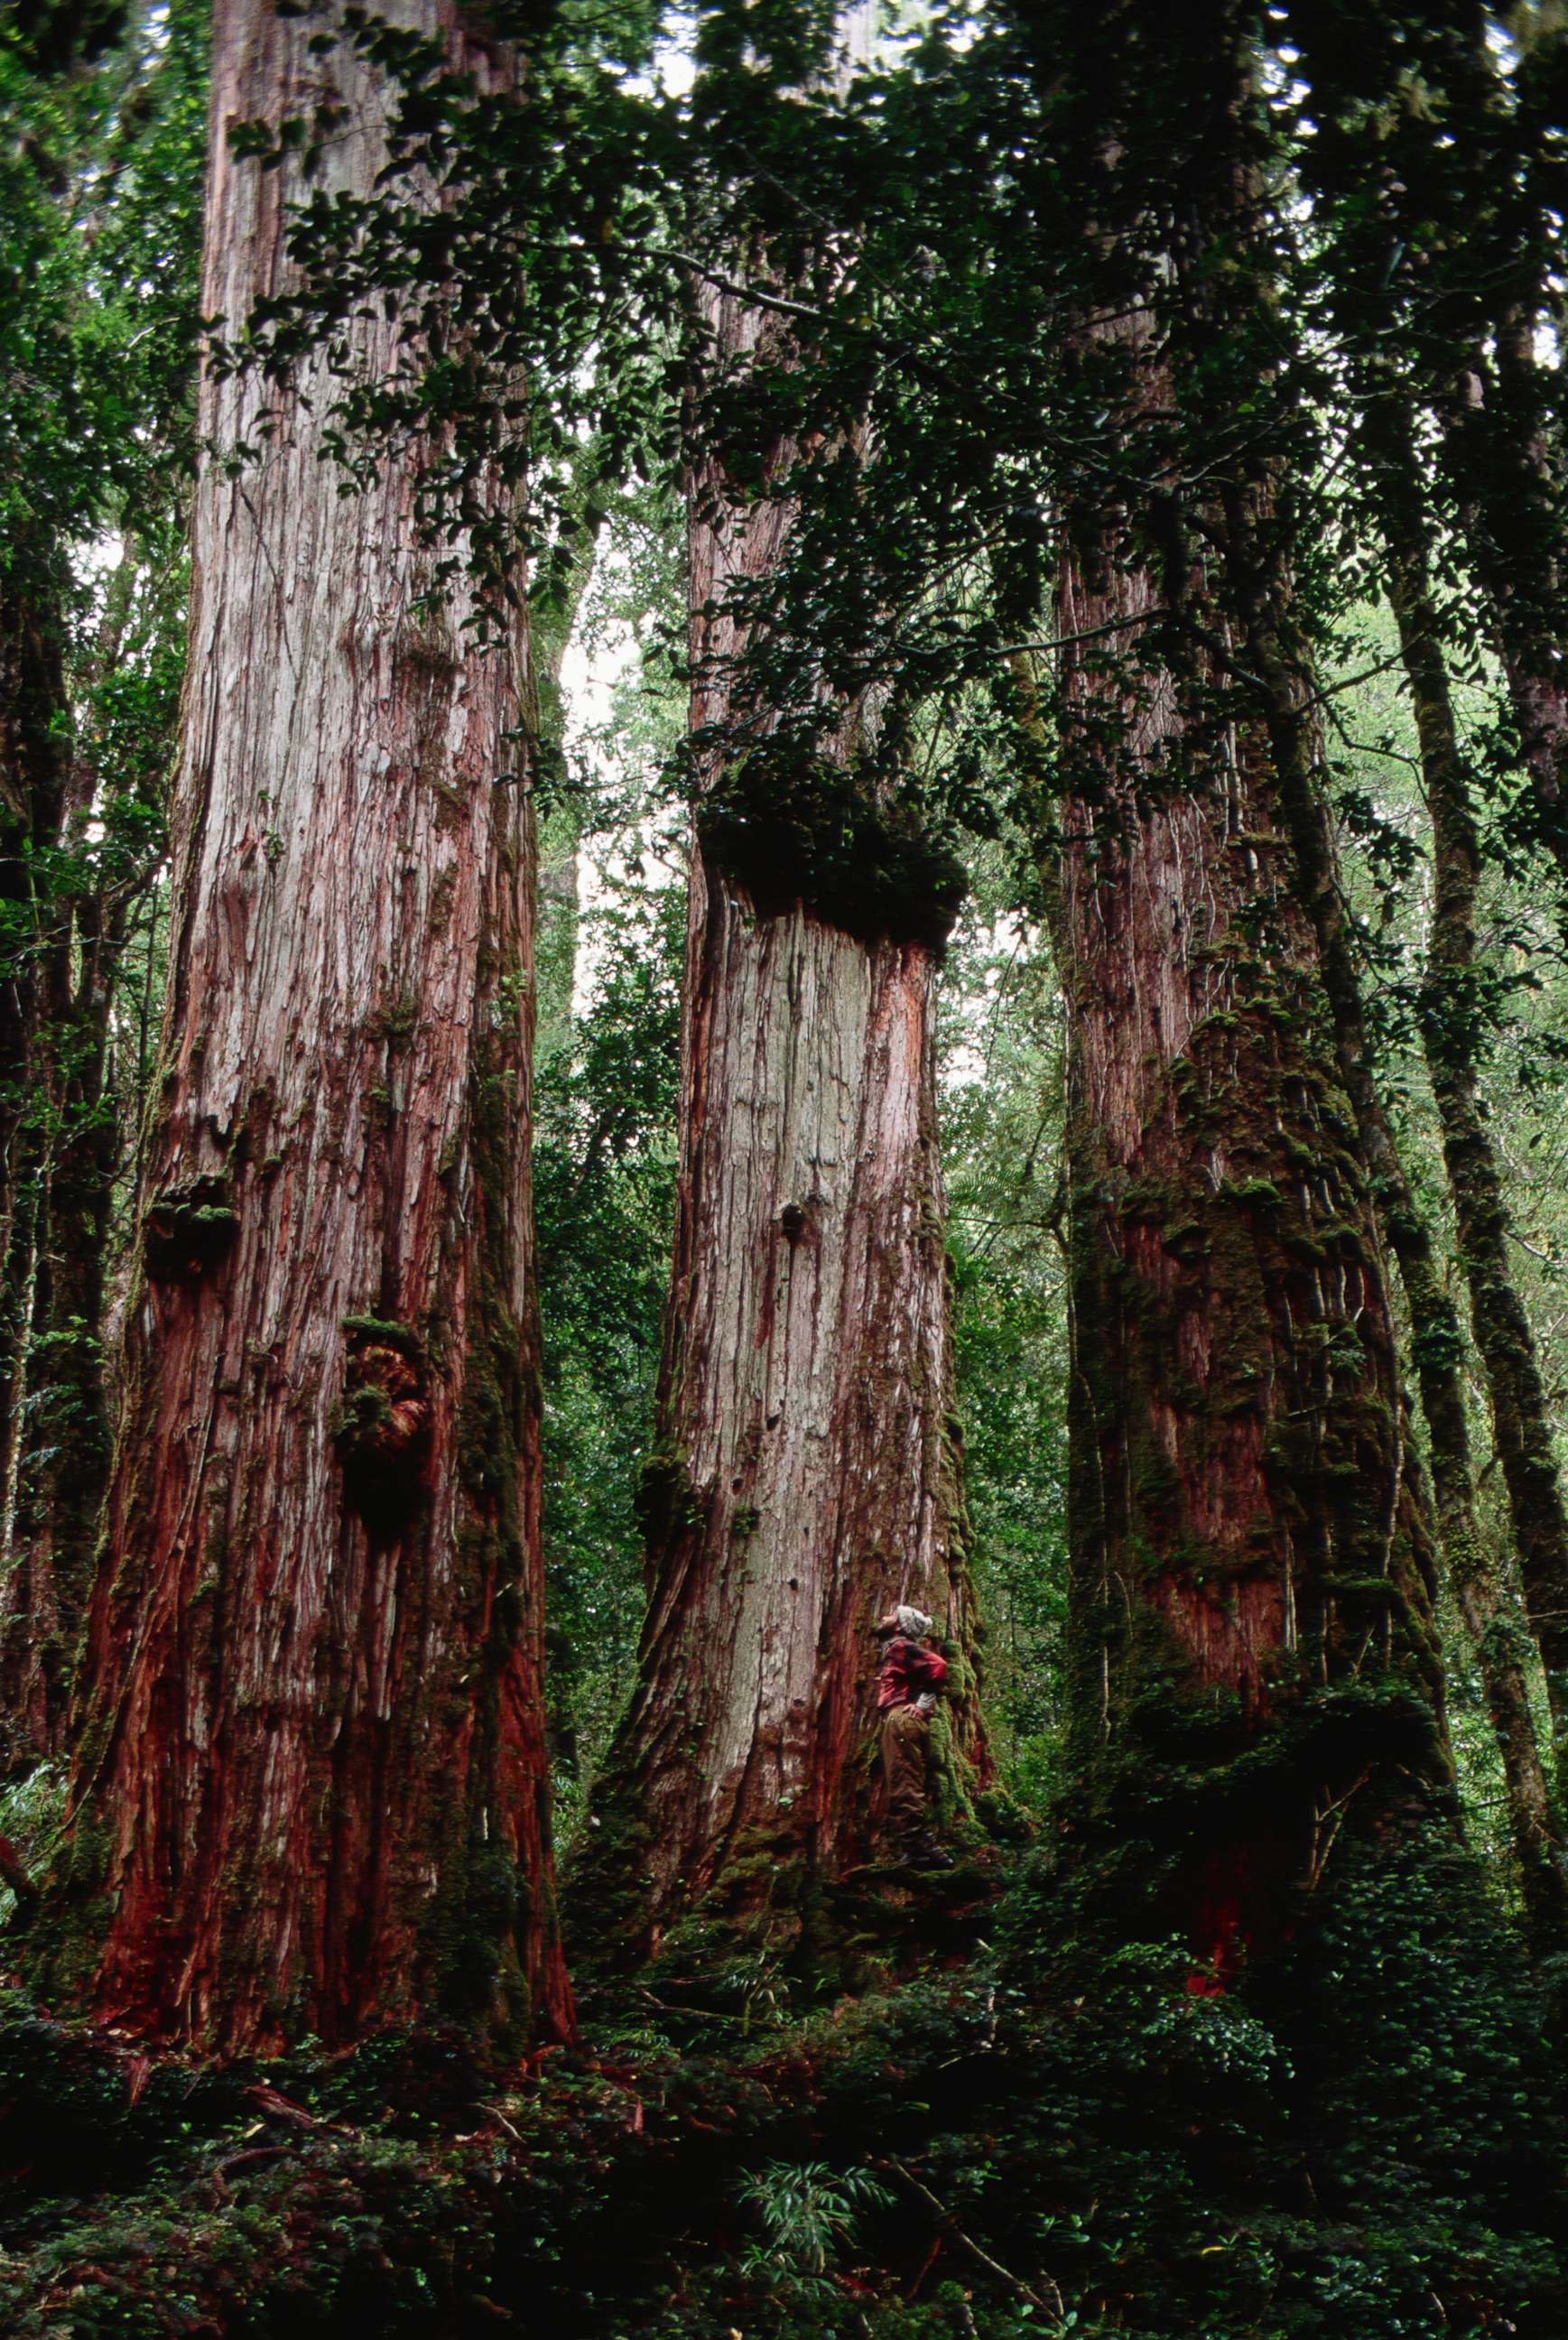 PHOTO: Giant alerce trees, some thousands of years old, stand in a forest in Southern Chile.